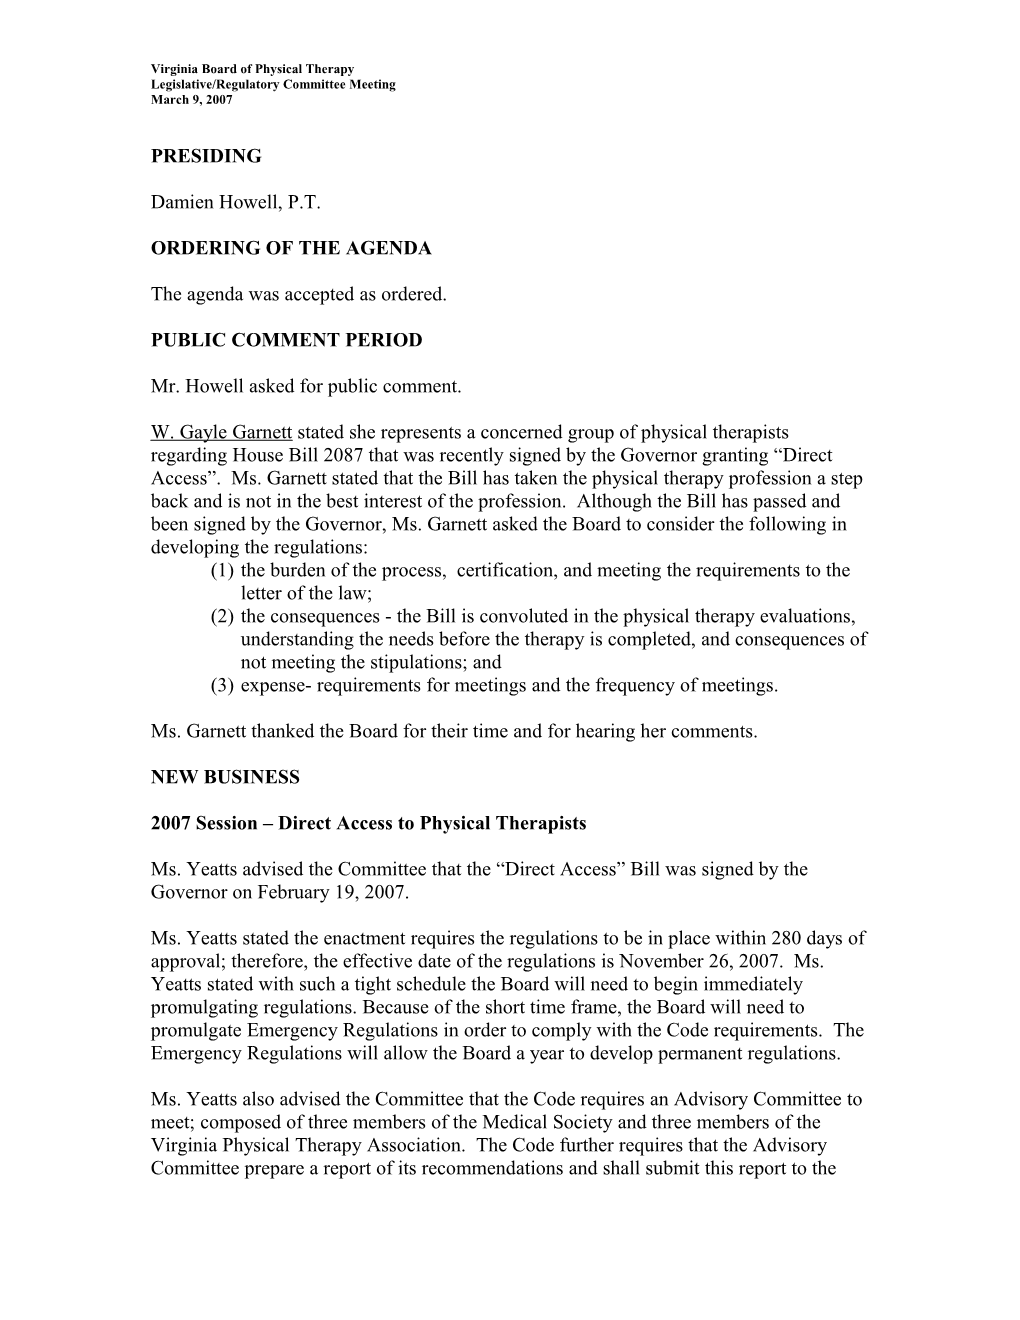 Physical Therapy-Legislative/Regulatory Committee Meeting Minutes March 9, 2007